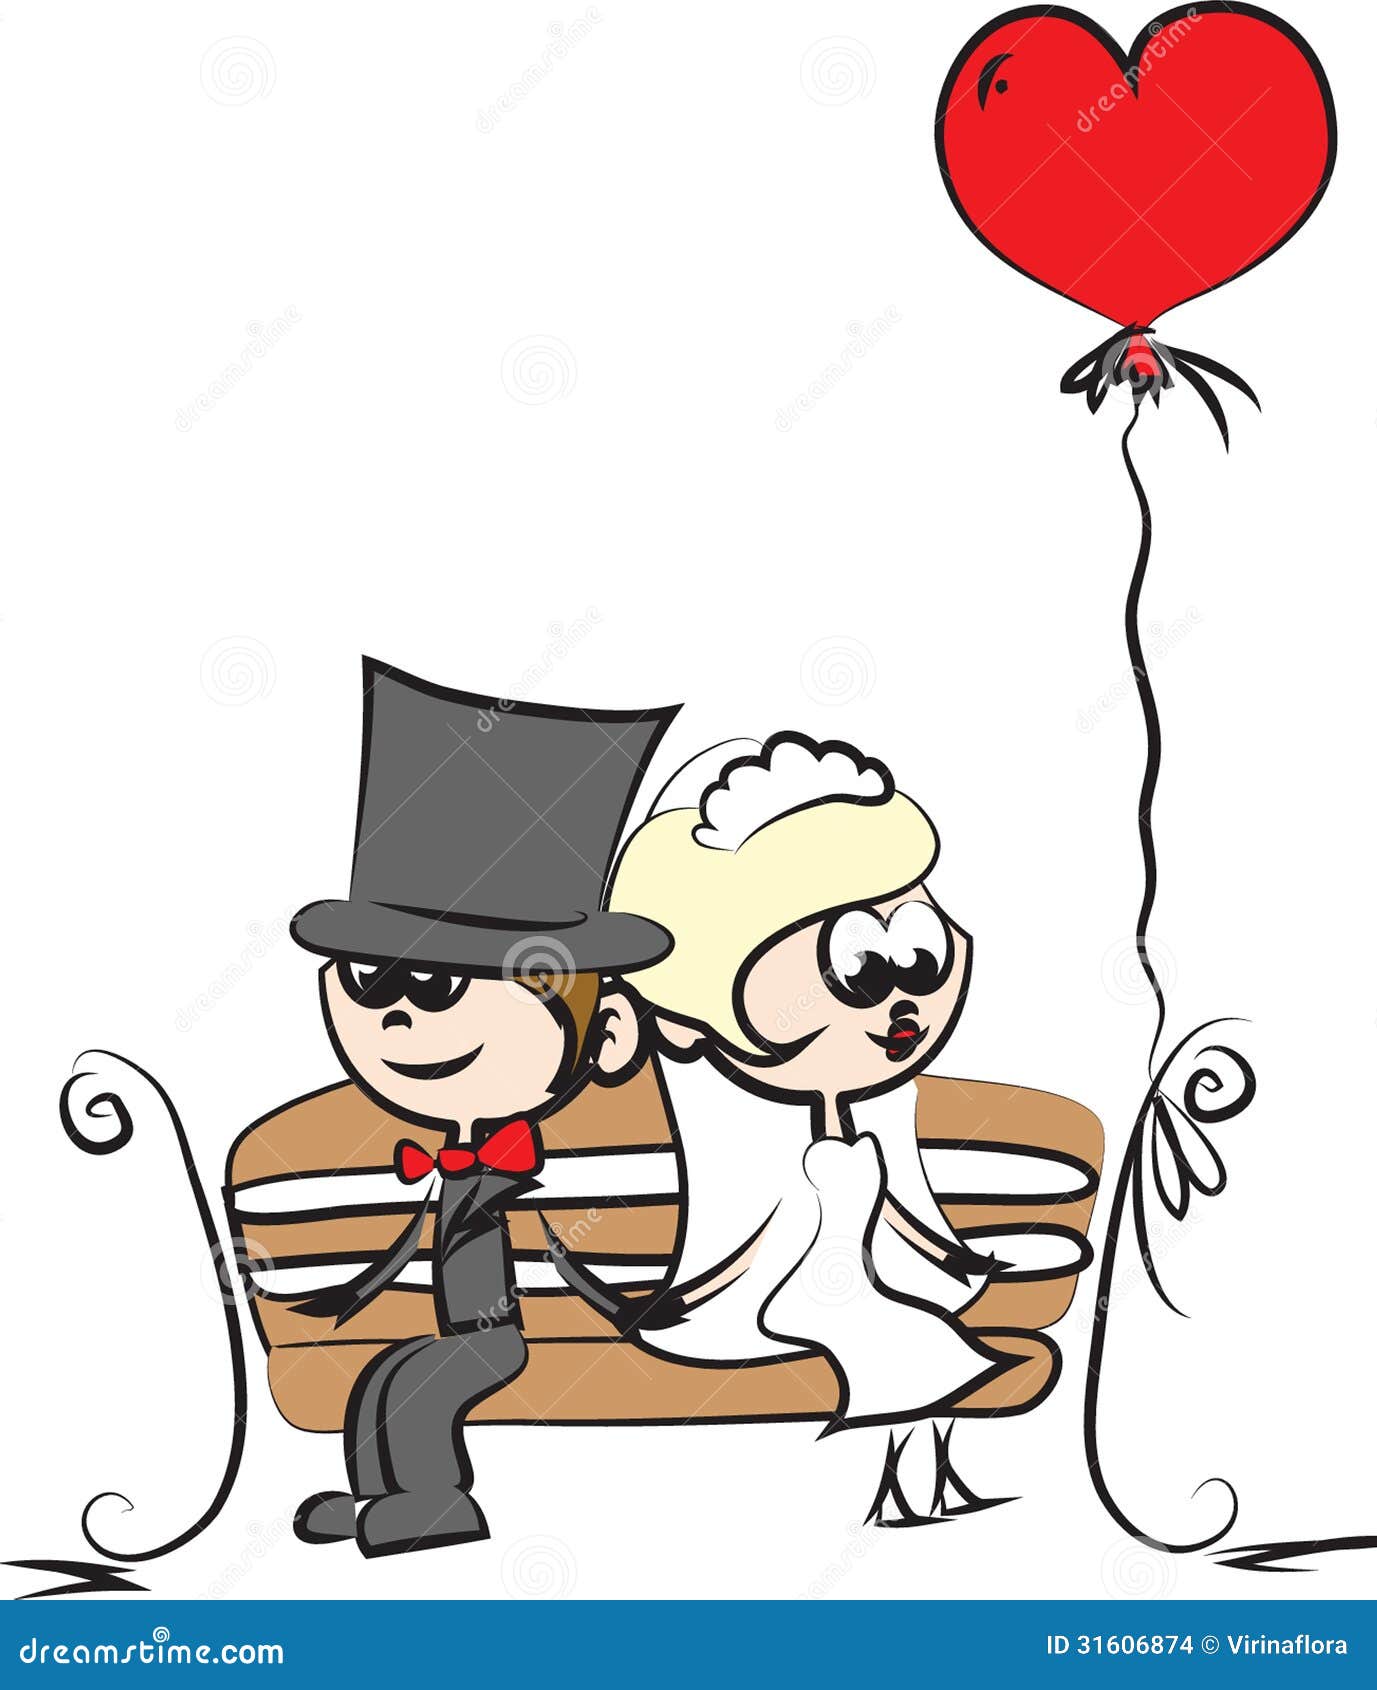 Cartoon wedding picture,vector illustration picture.